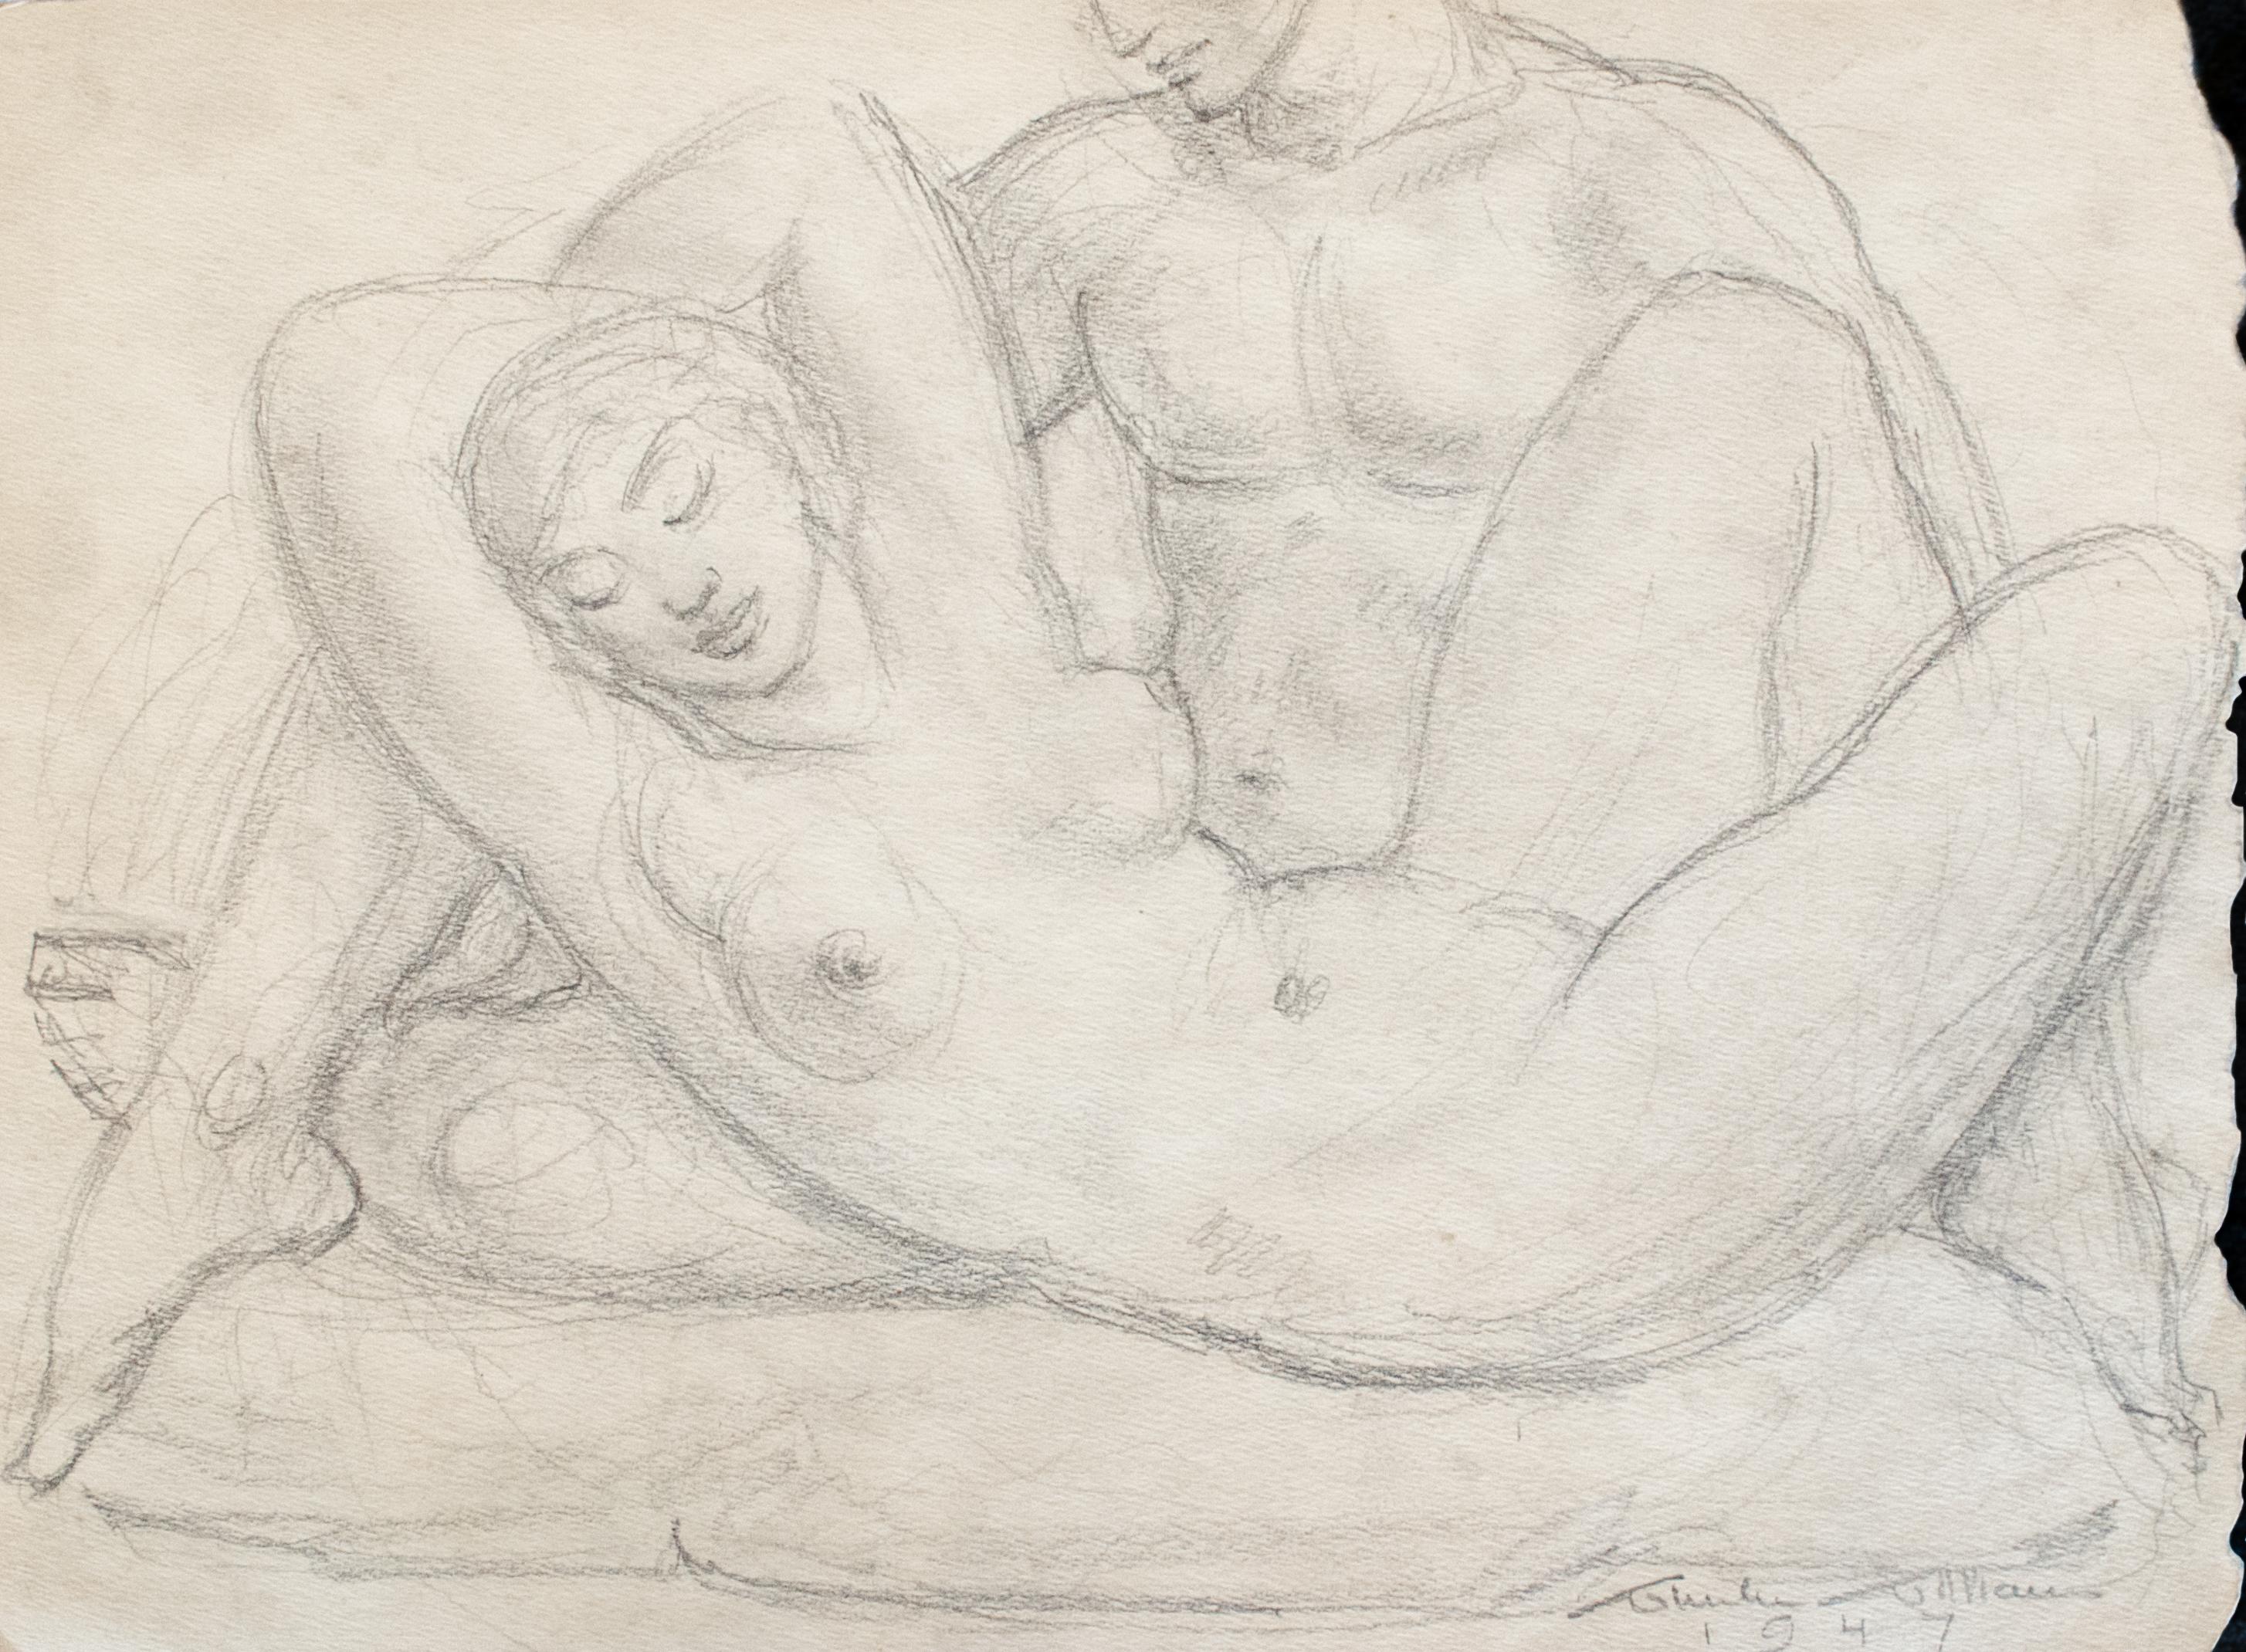 Wheeler Williams (American, 1897-1972)
Untitled (Study of Three Graces), 1947
Pencil on paper
9 1/4 x 12 1/4 in. 
Signed lower right: Wheeler Williams, 1947

A native of Chicago, Wheeler Williams is known for his allegorical, narrative work